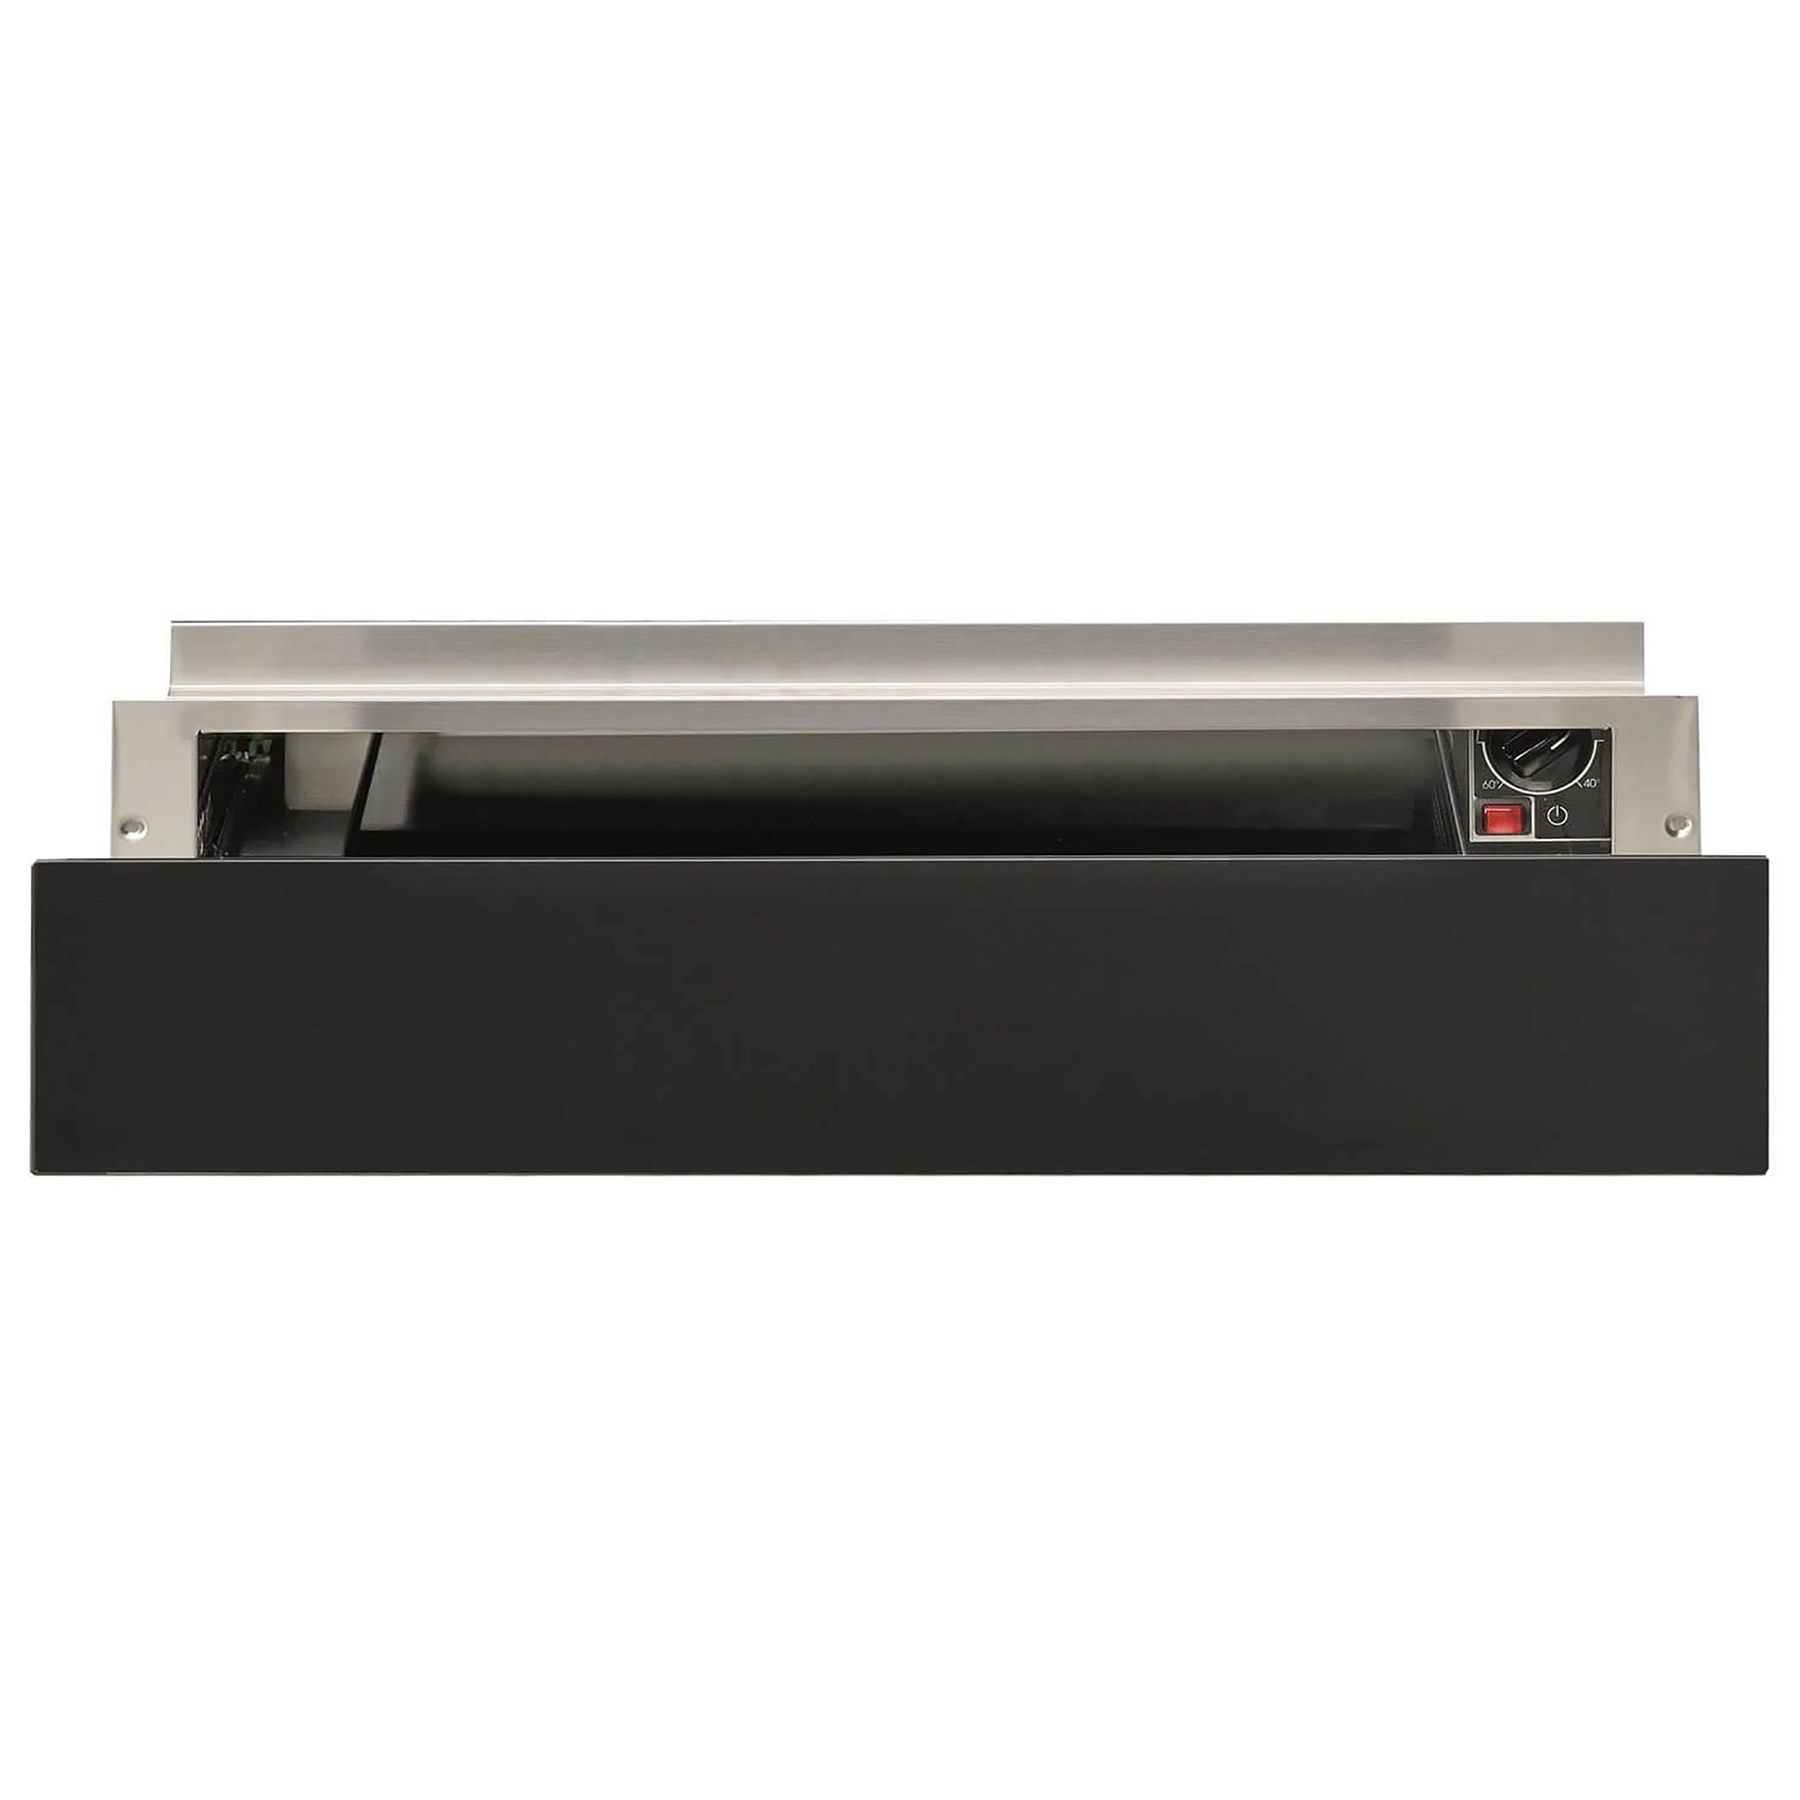 Image of Hotpoint WD914NB 14cm Built In Warming Drawer in Black 16L Capacity